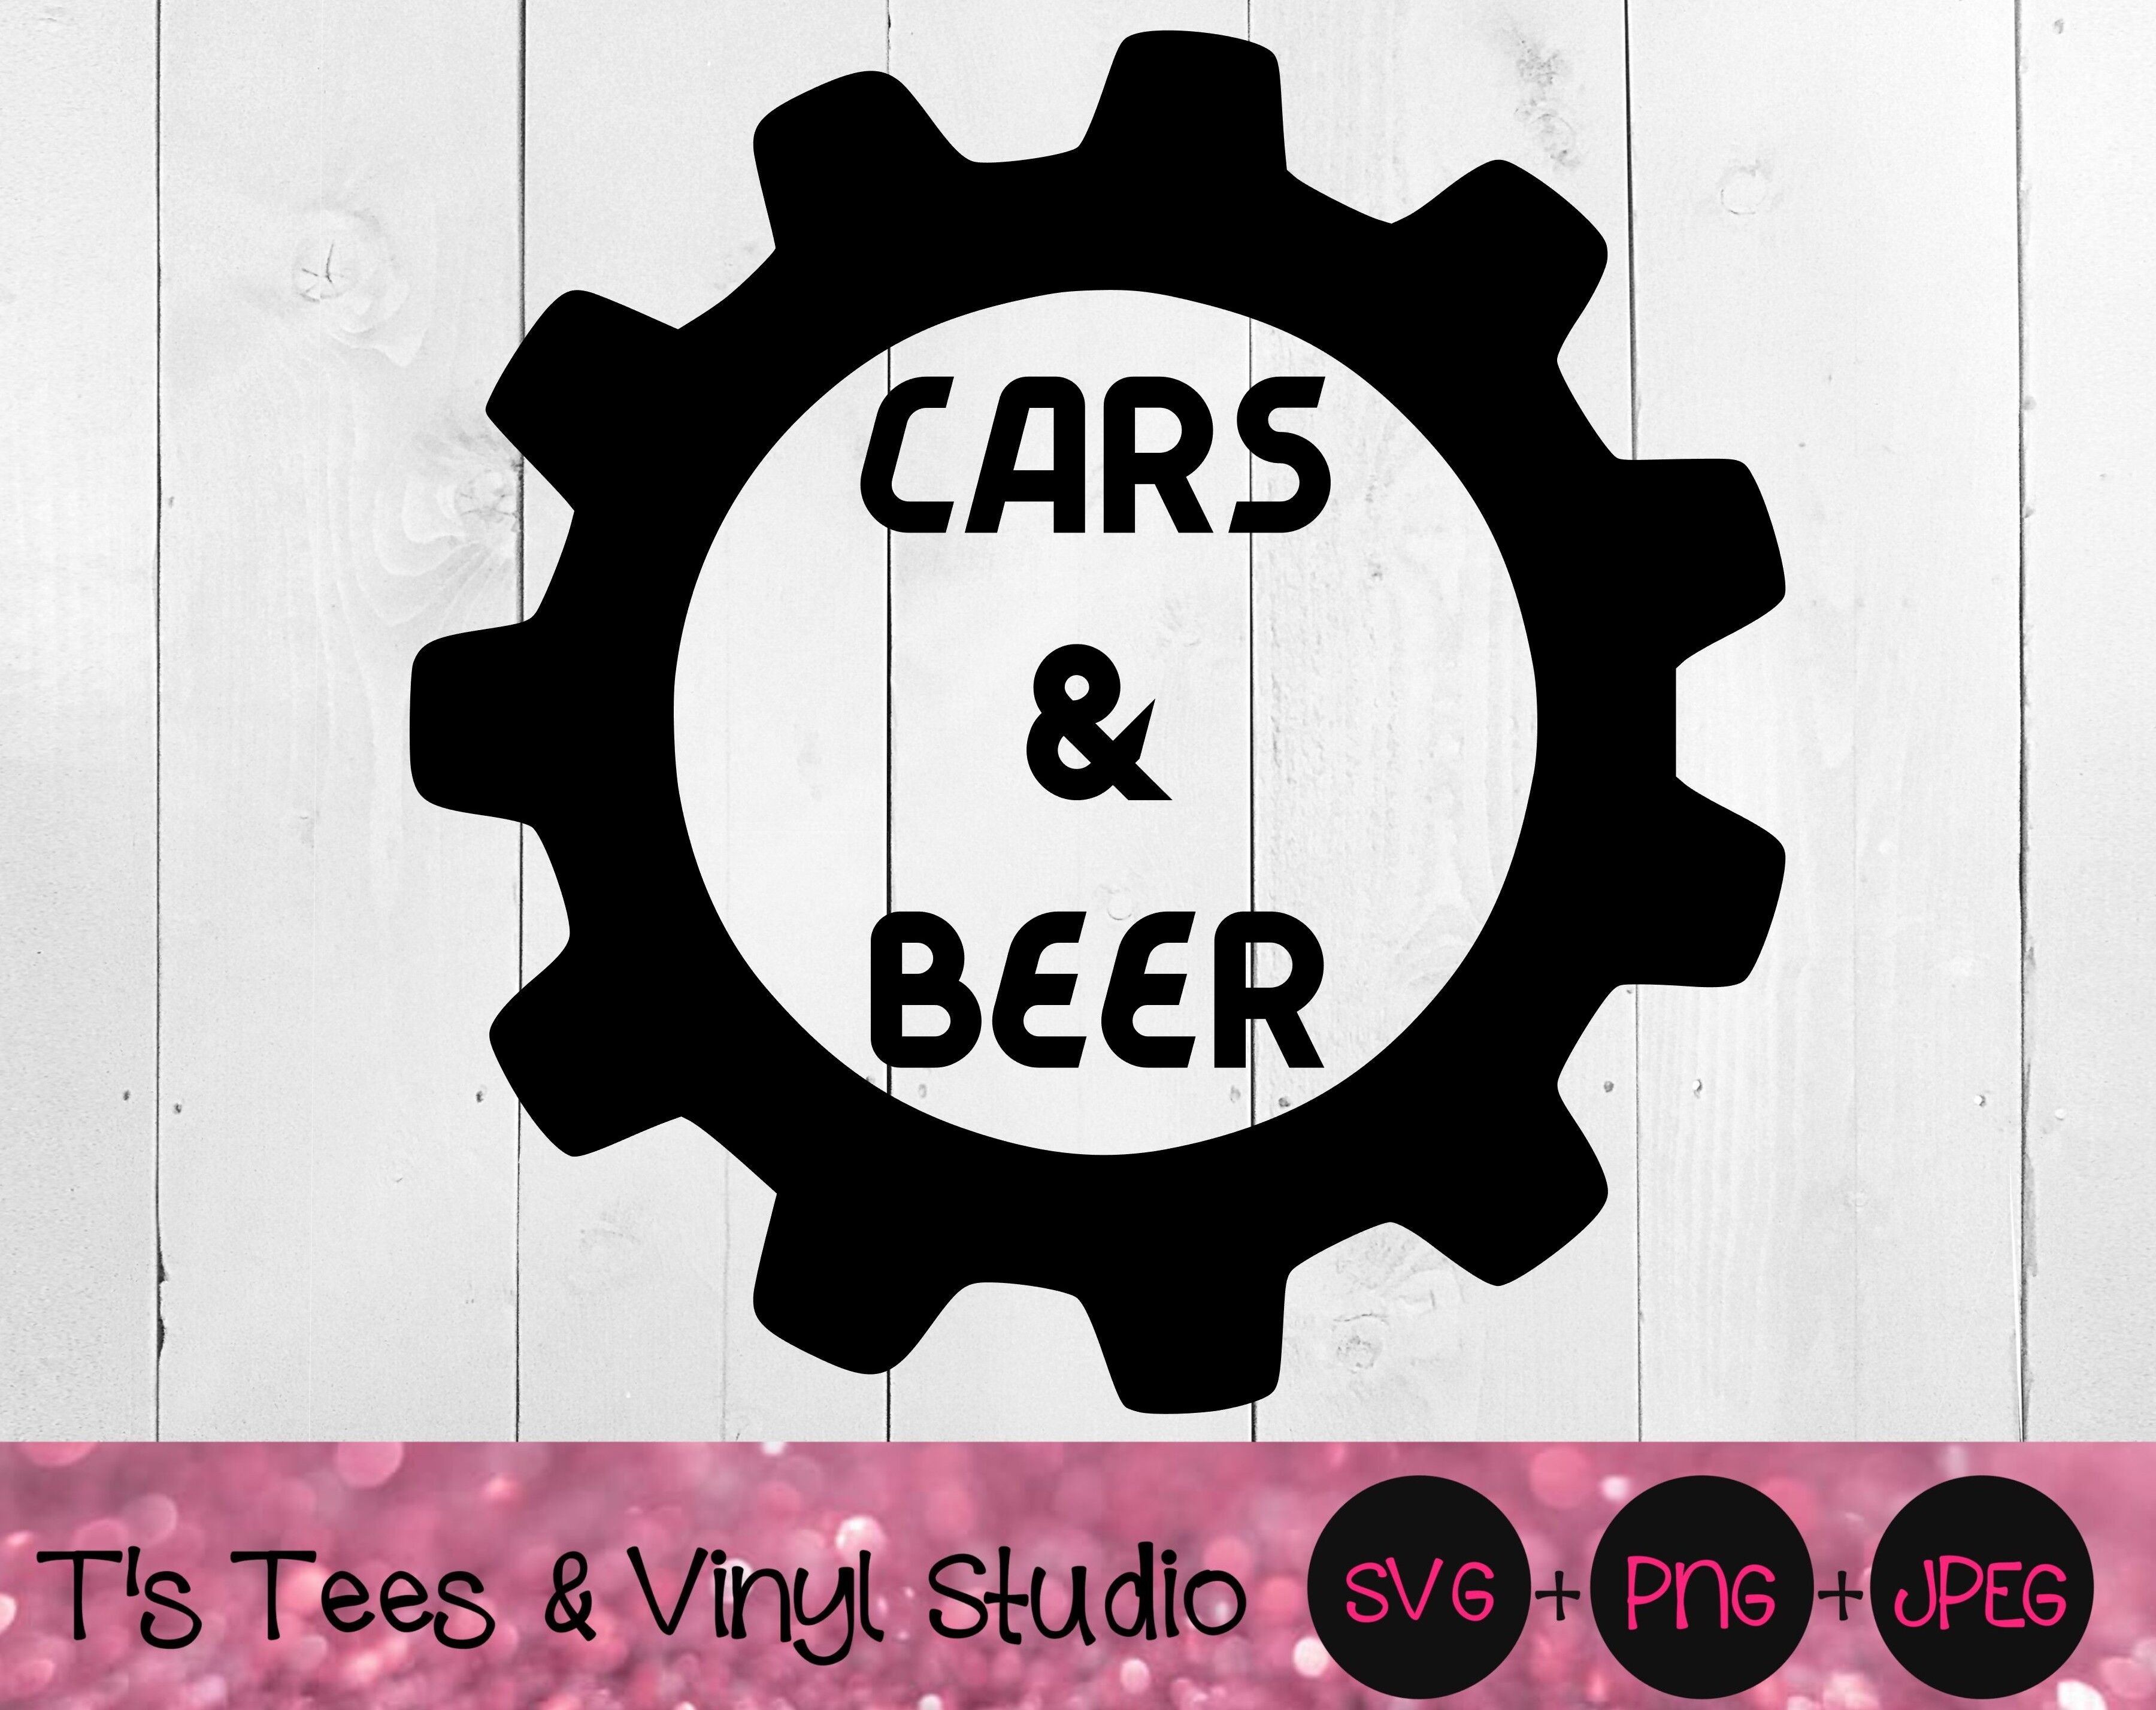 Cars And Beer Gear Svg Mechanic Png Things For Men Jpeg Cars Svg B By T S Tees Vinyl Studio Thehungryjpeg Com